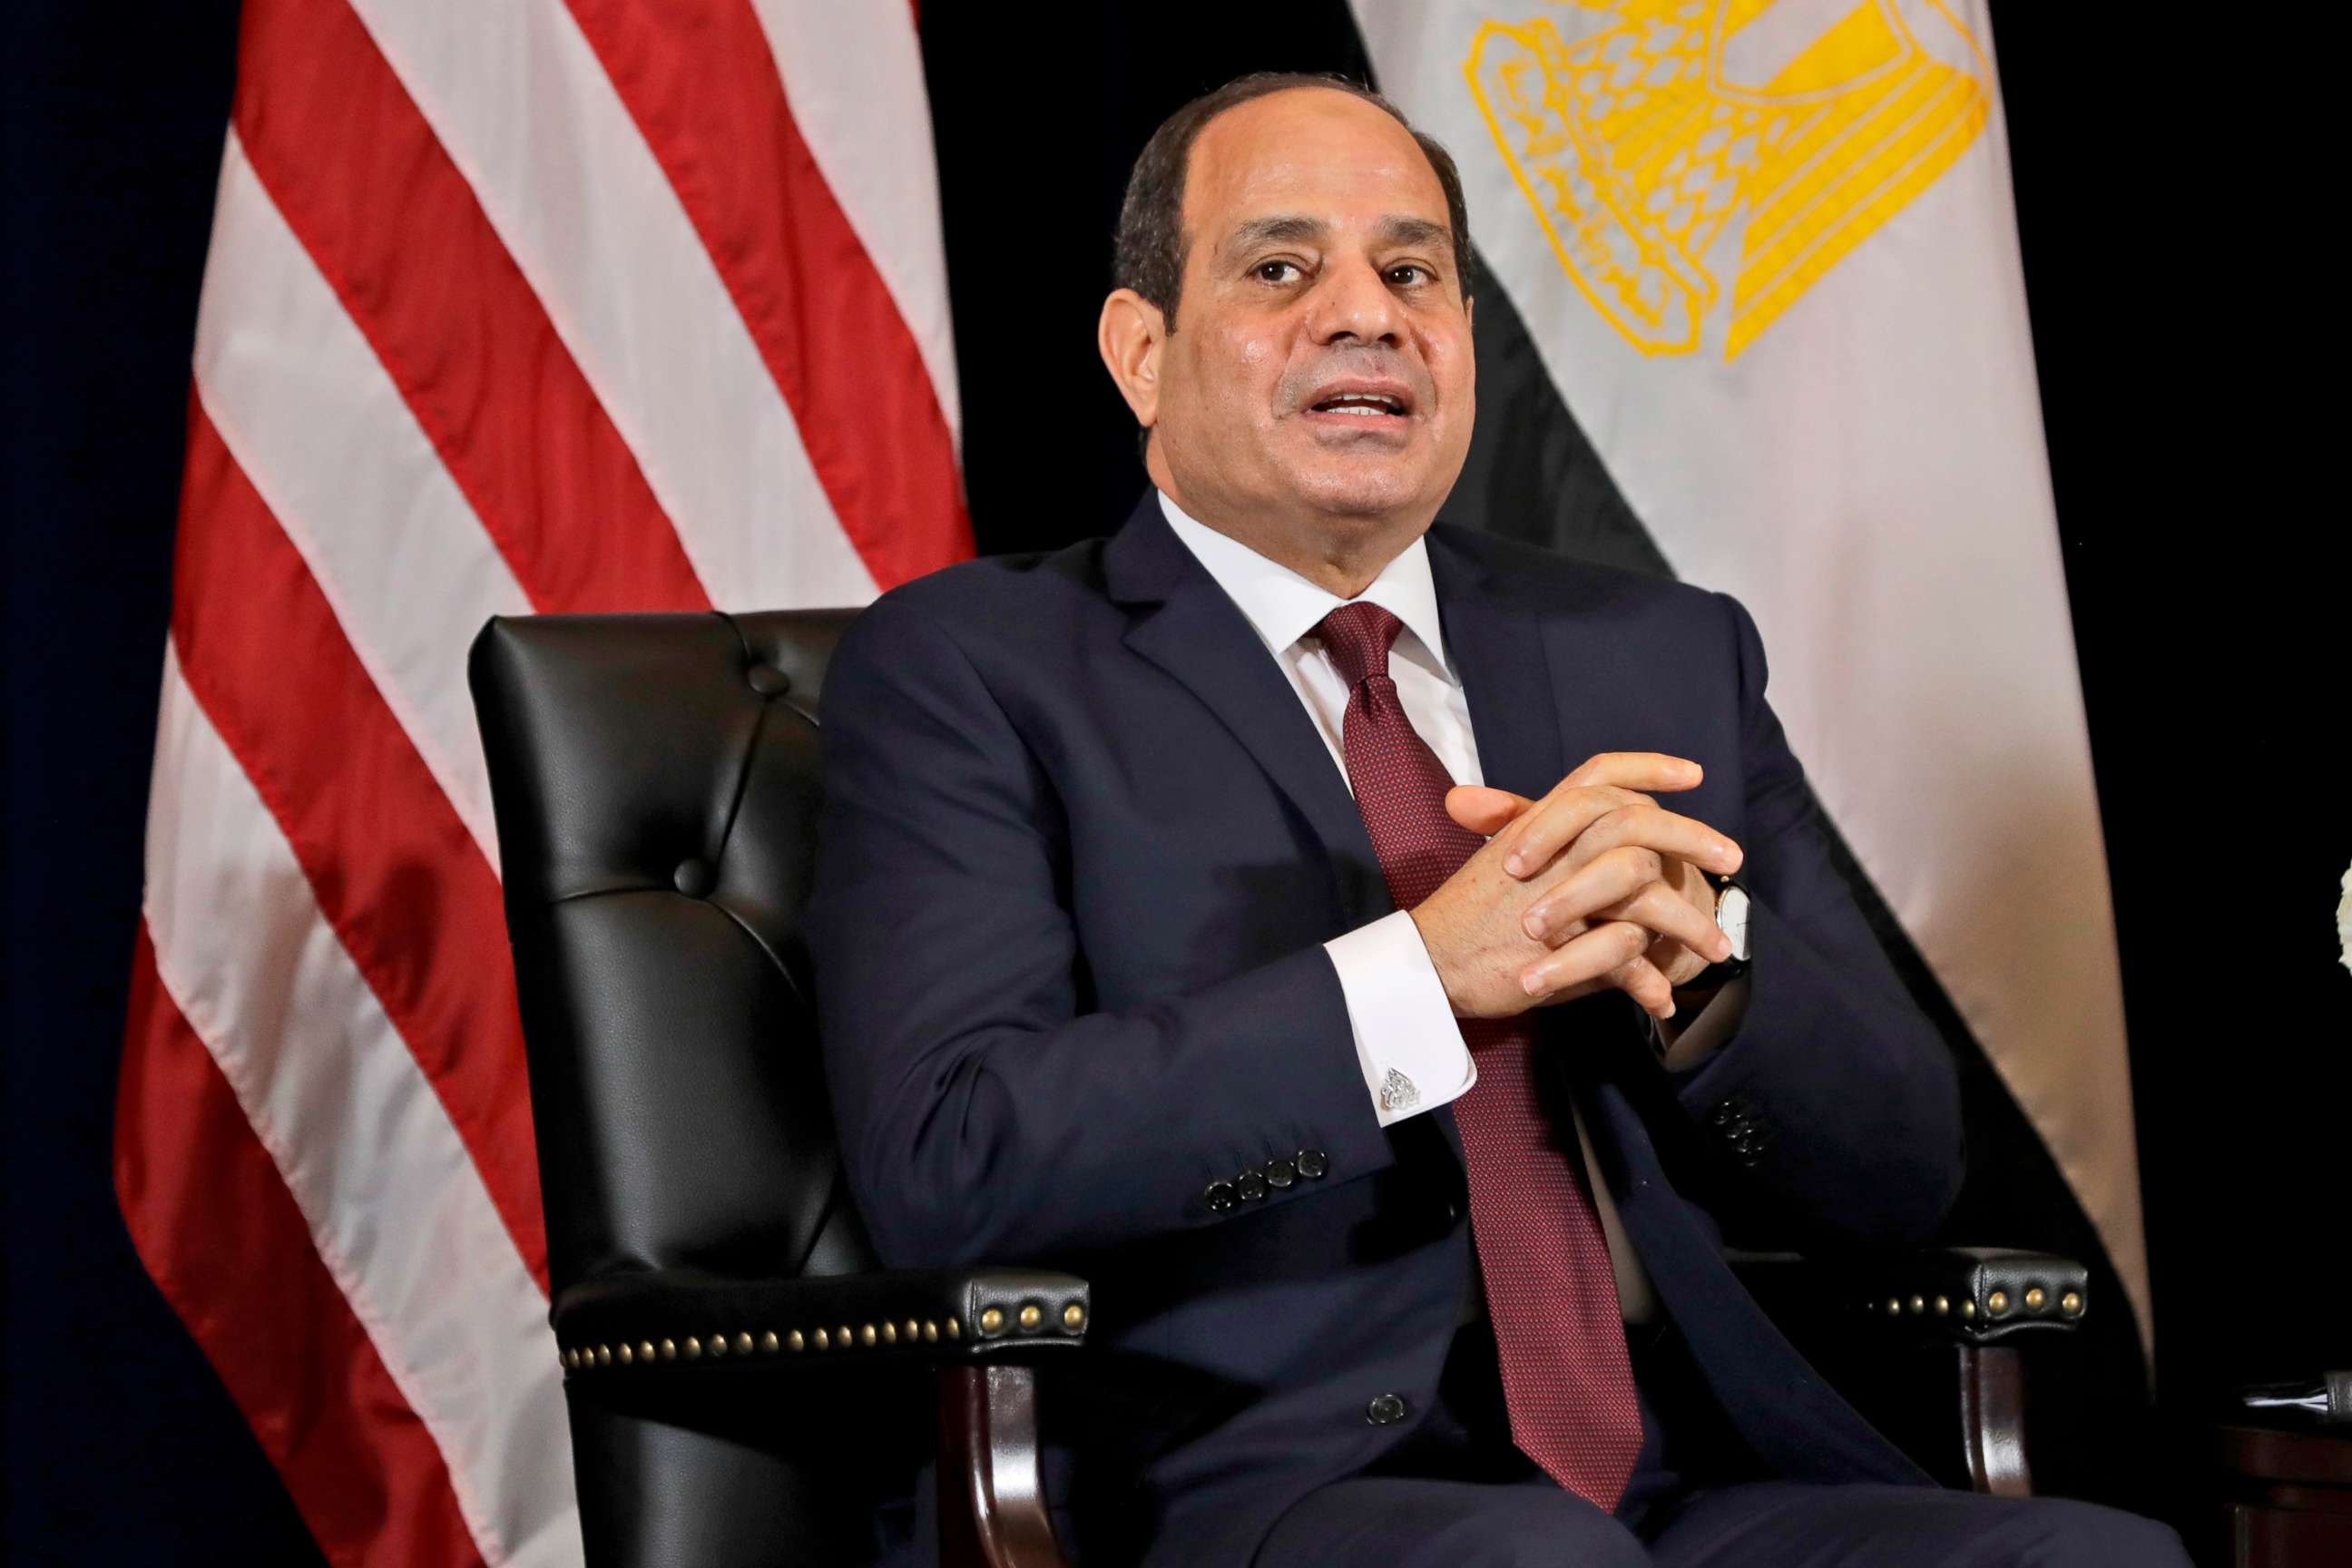 PHOTO: Egyptian President Abdel-Fattah el-Sisi speaks as he meets with President Donald Trump at the InterContinental Barclay hotel during the United Nations General Assembly, Sept. 23, 2019, in New York.